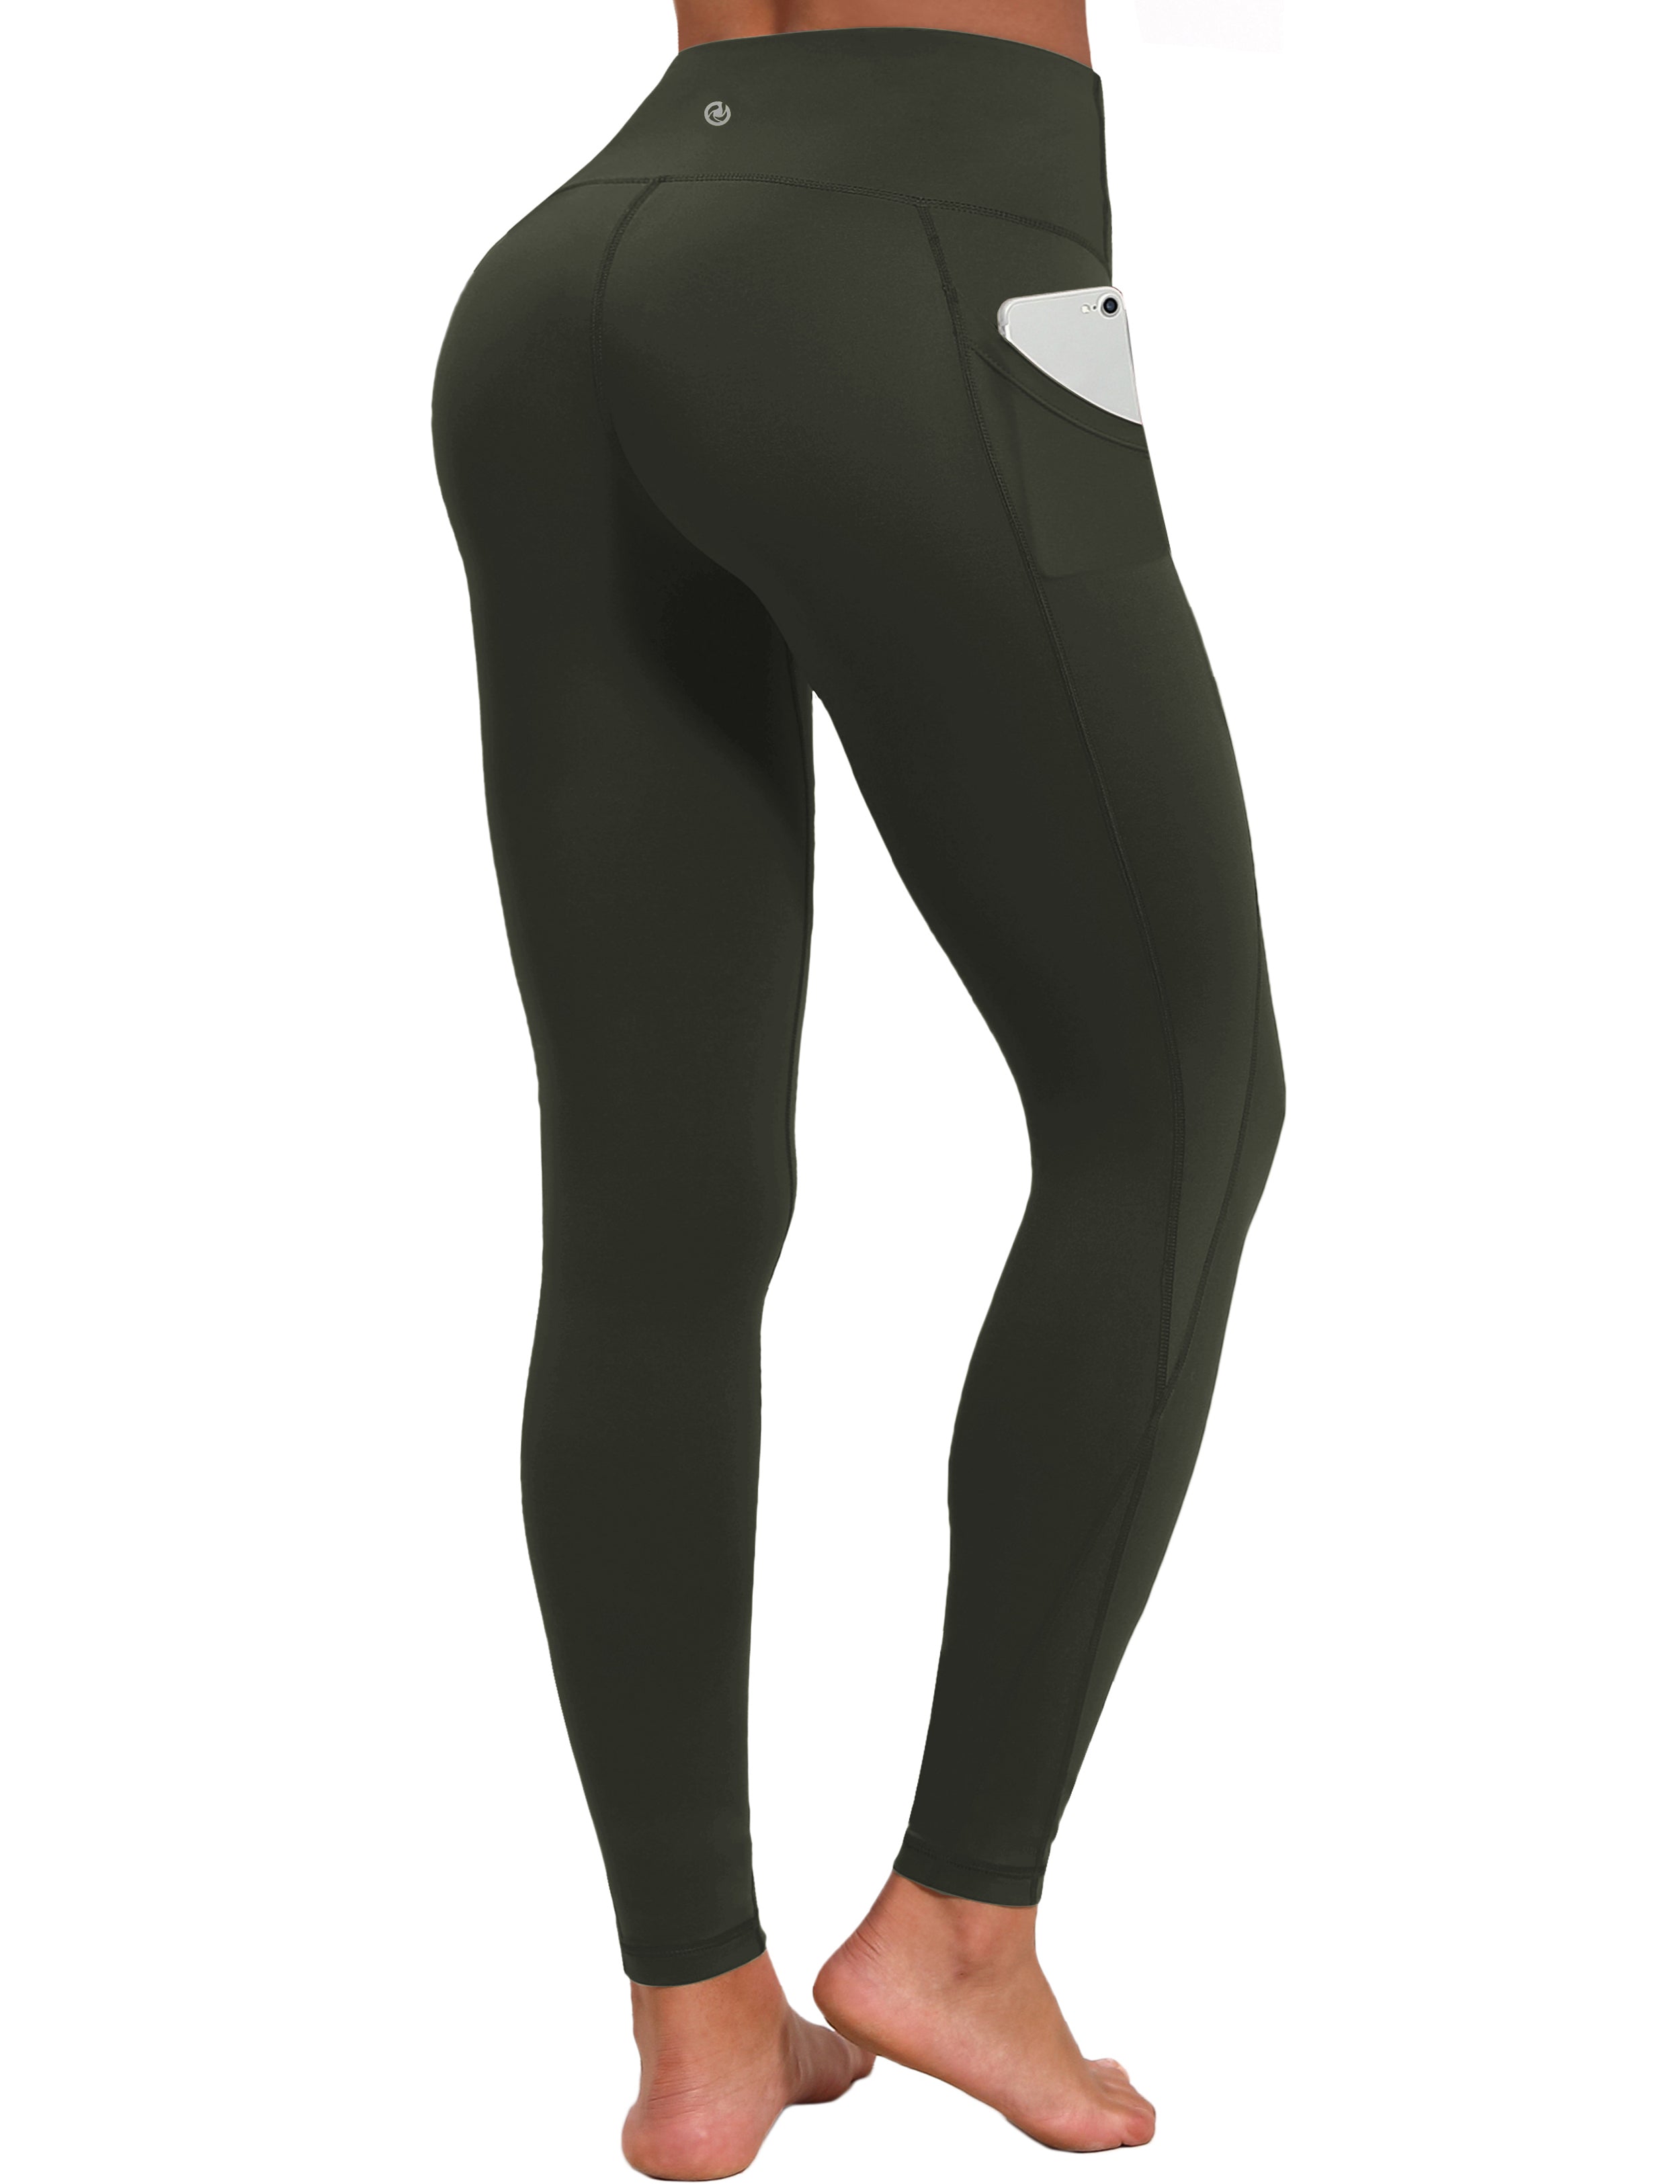 High Waist Side Pockets Running Pants olivegray 75% Nylon, 25% Spandex Fabric doesn't attract lint easily 4-way stretch No see-through Moisture-wicking Tummy control Inner pocket